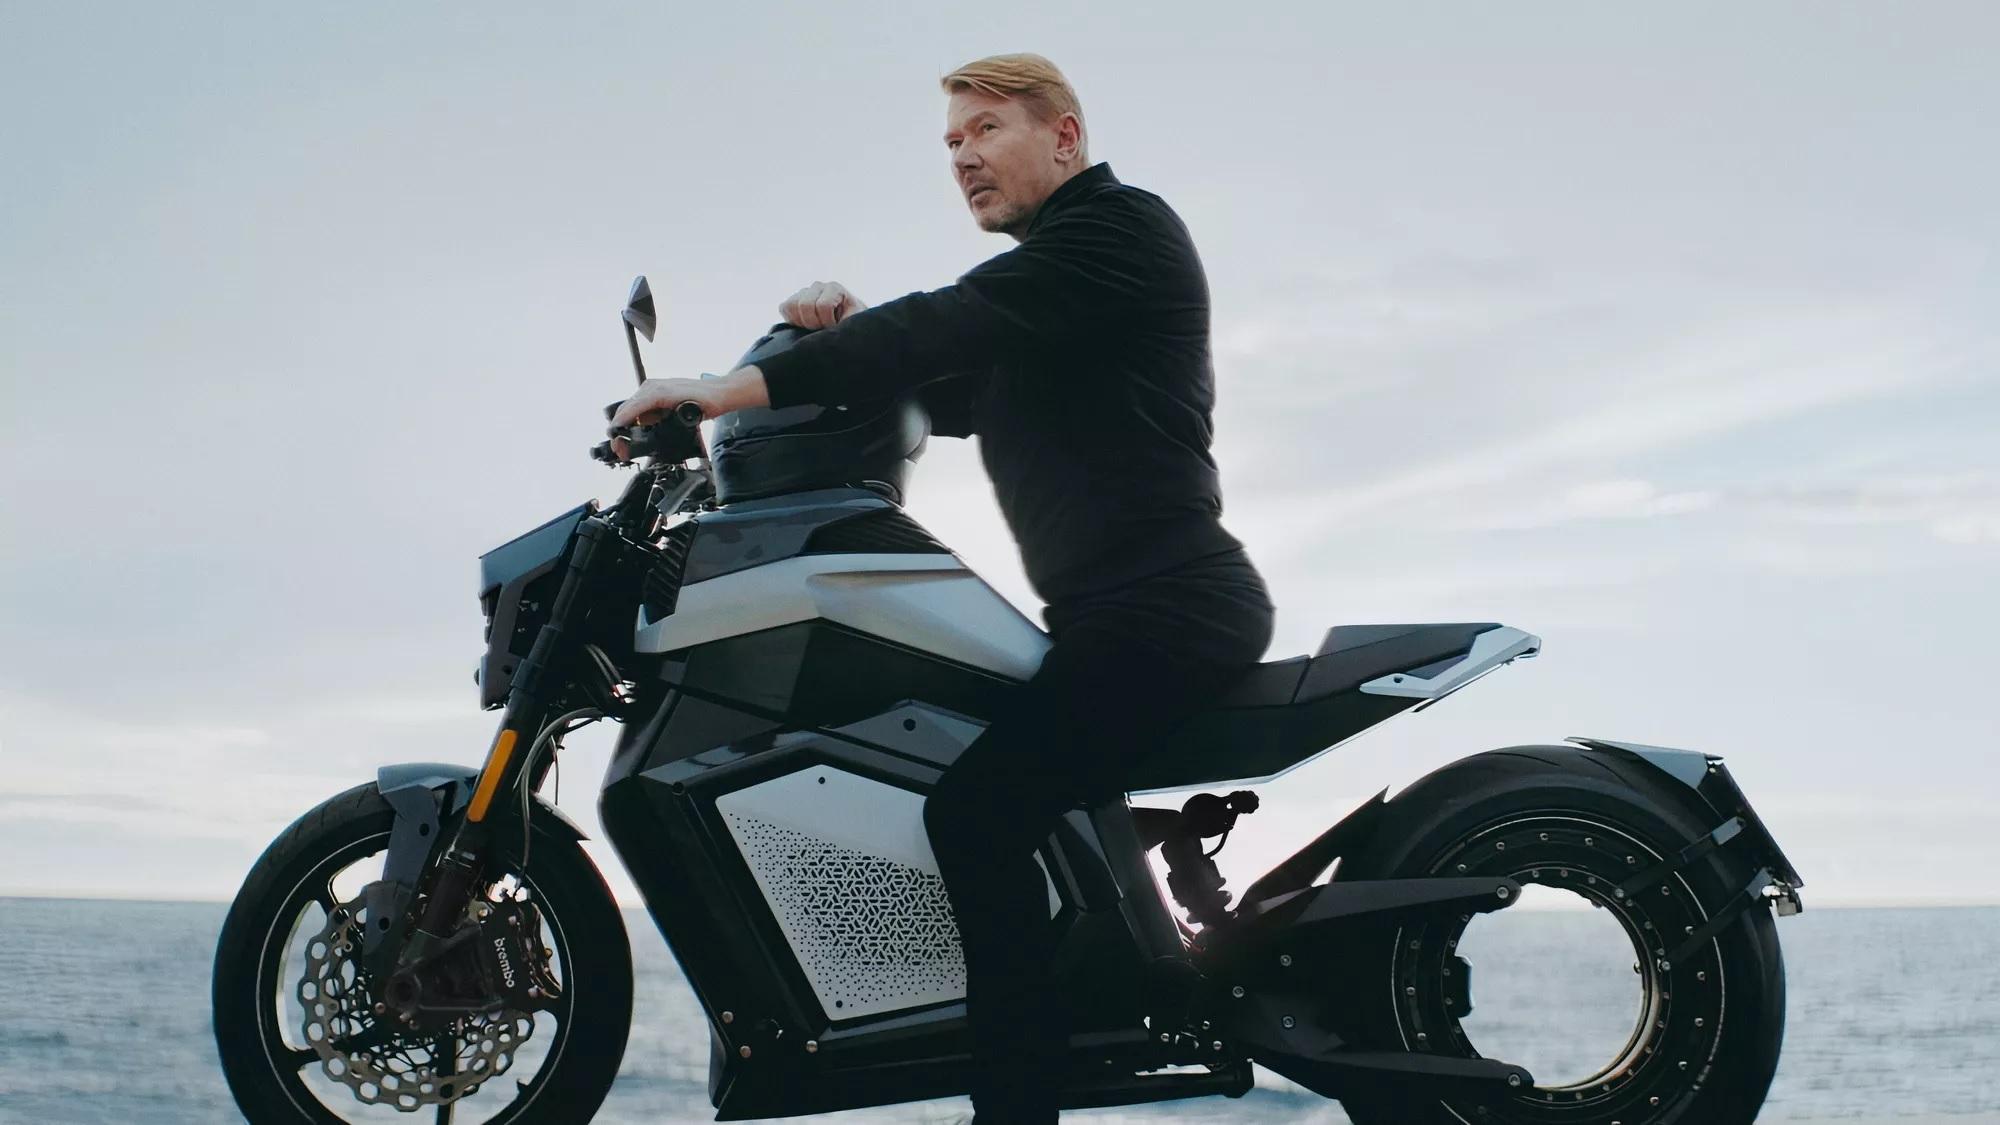 verge mika hakkinen signature edition is a bullet fast superbike designed by the f1 legend 215217 1